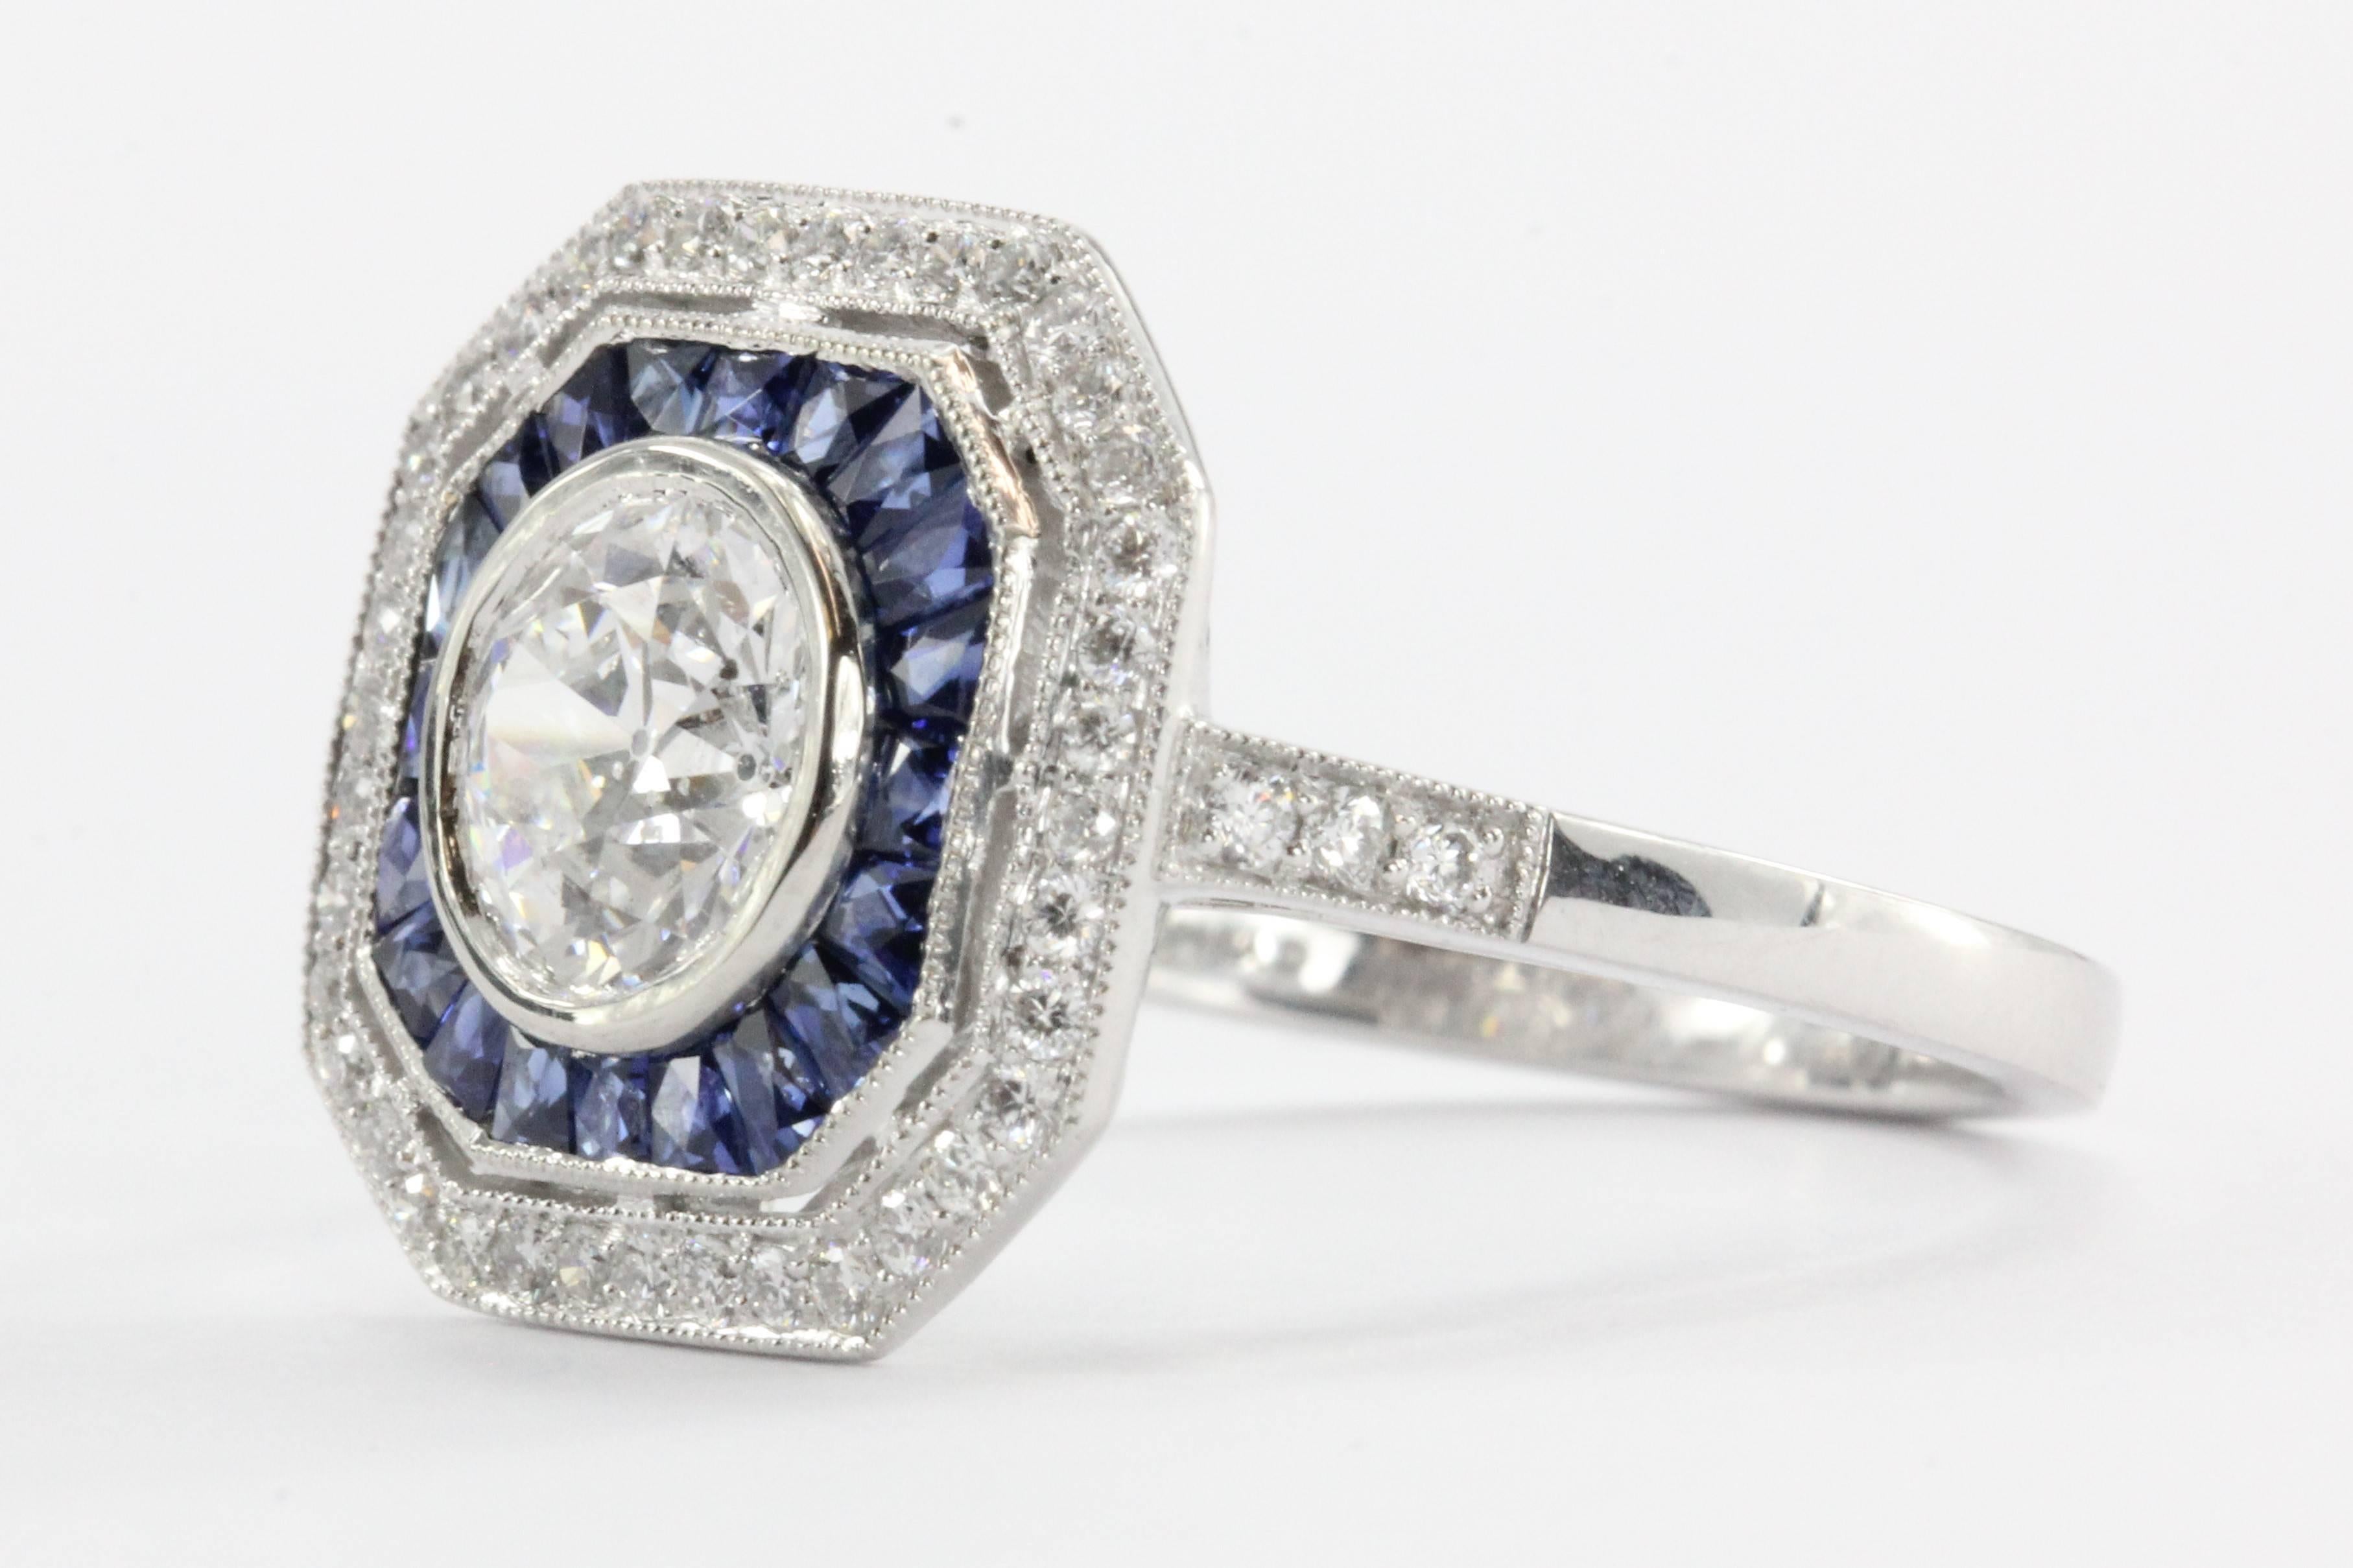 Brand New Sophia D Art Deco inspired platinum set diamond and sapphire engagement ring. The center stone is a genuine antique diamond.  The diamond is an old European cut 1.02 carat, E color, I1 clarity. The center stone is GIA certified and come